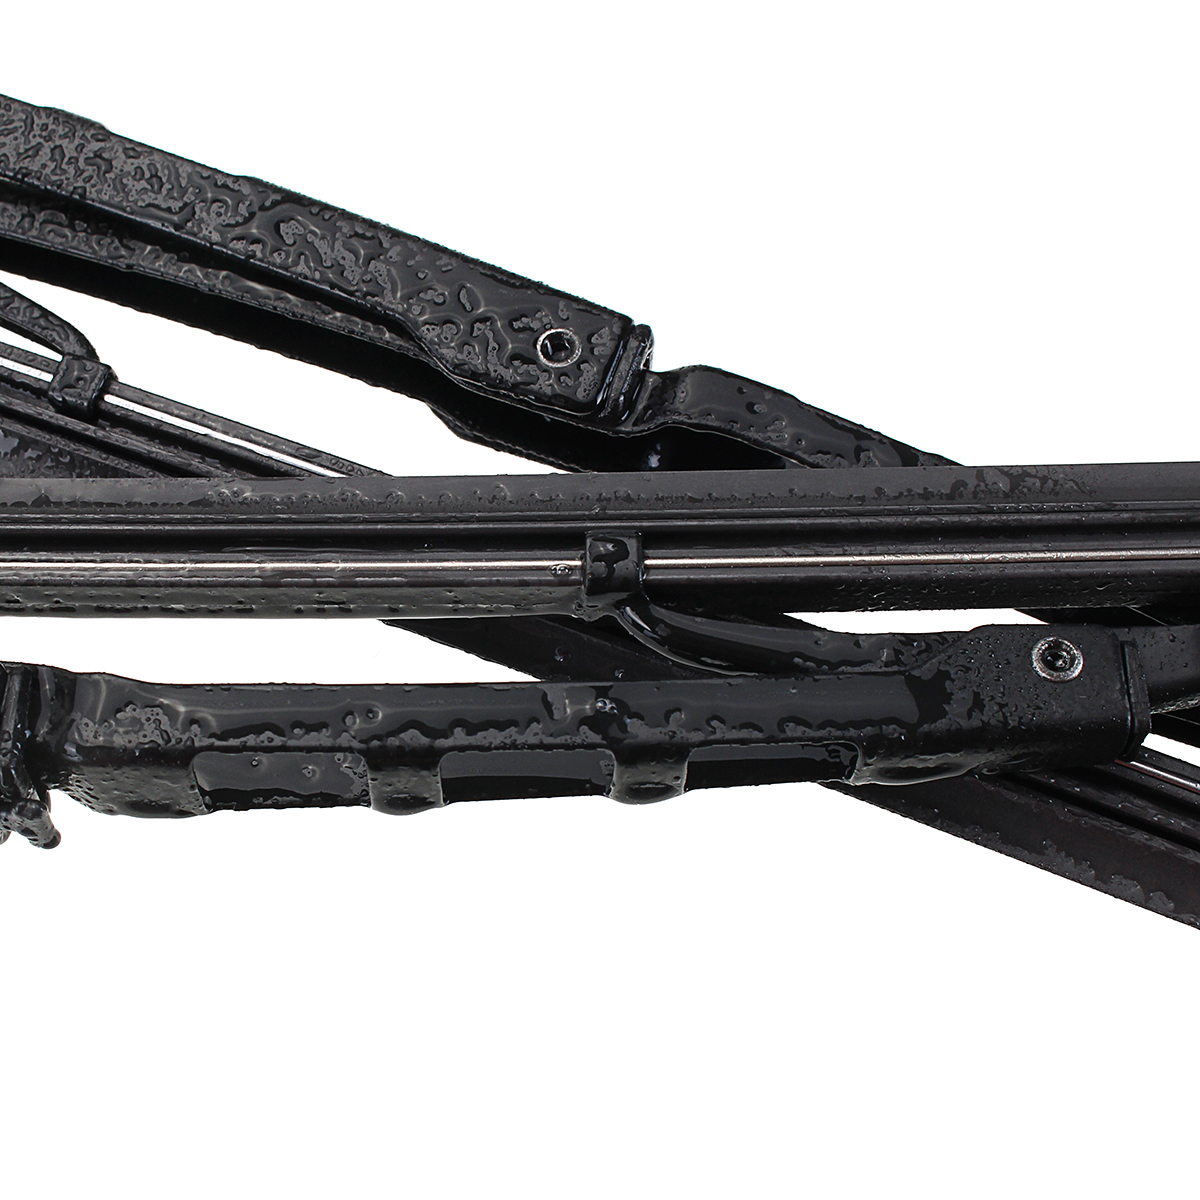 Car Front Pair Metal Frames Windscreen Wiper Blades for BMW Series3 E46 1998-2006